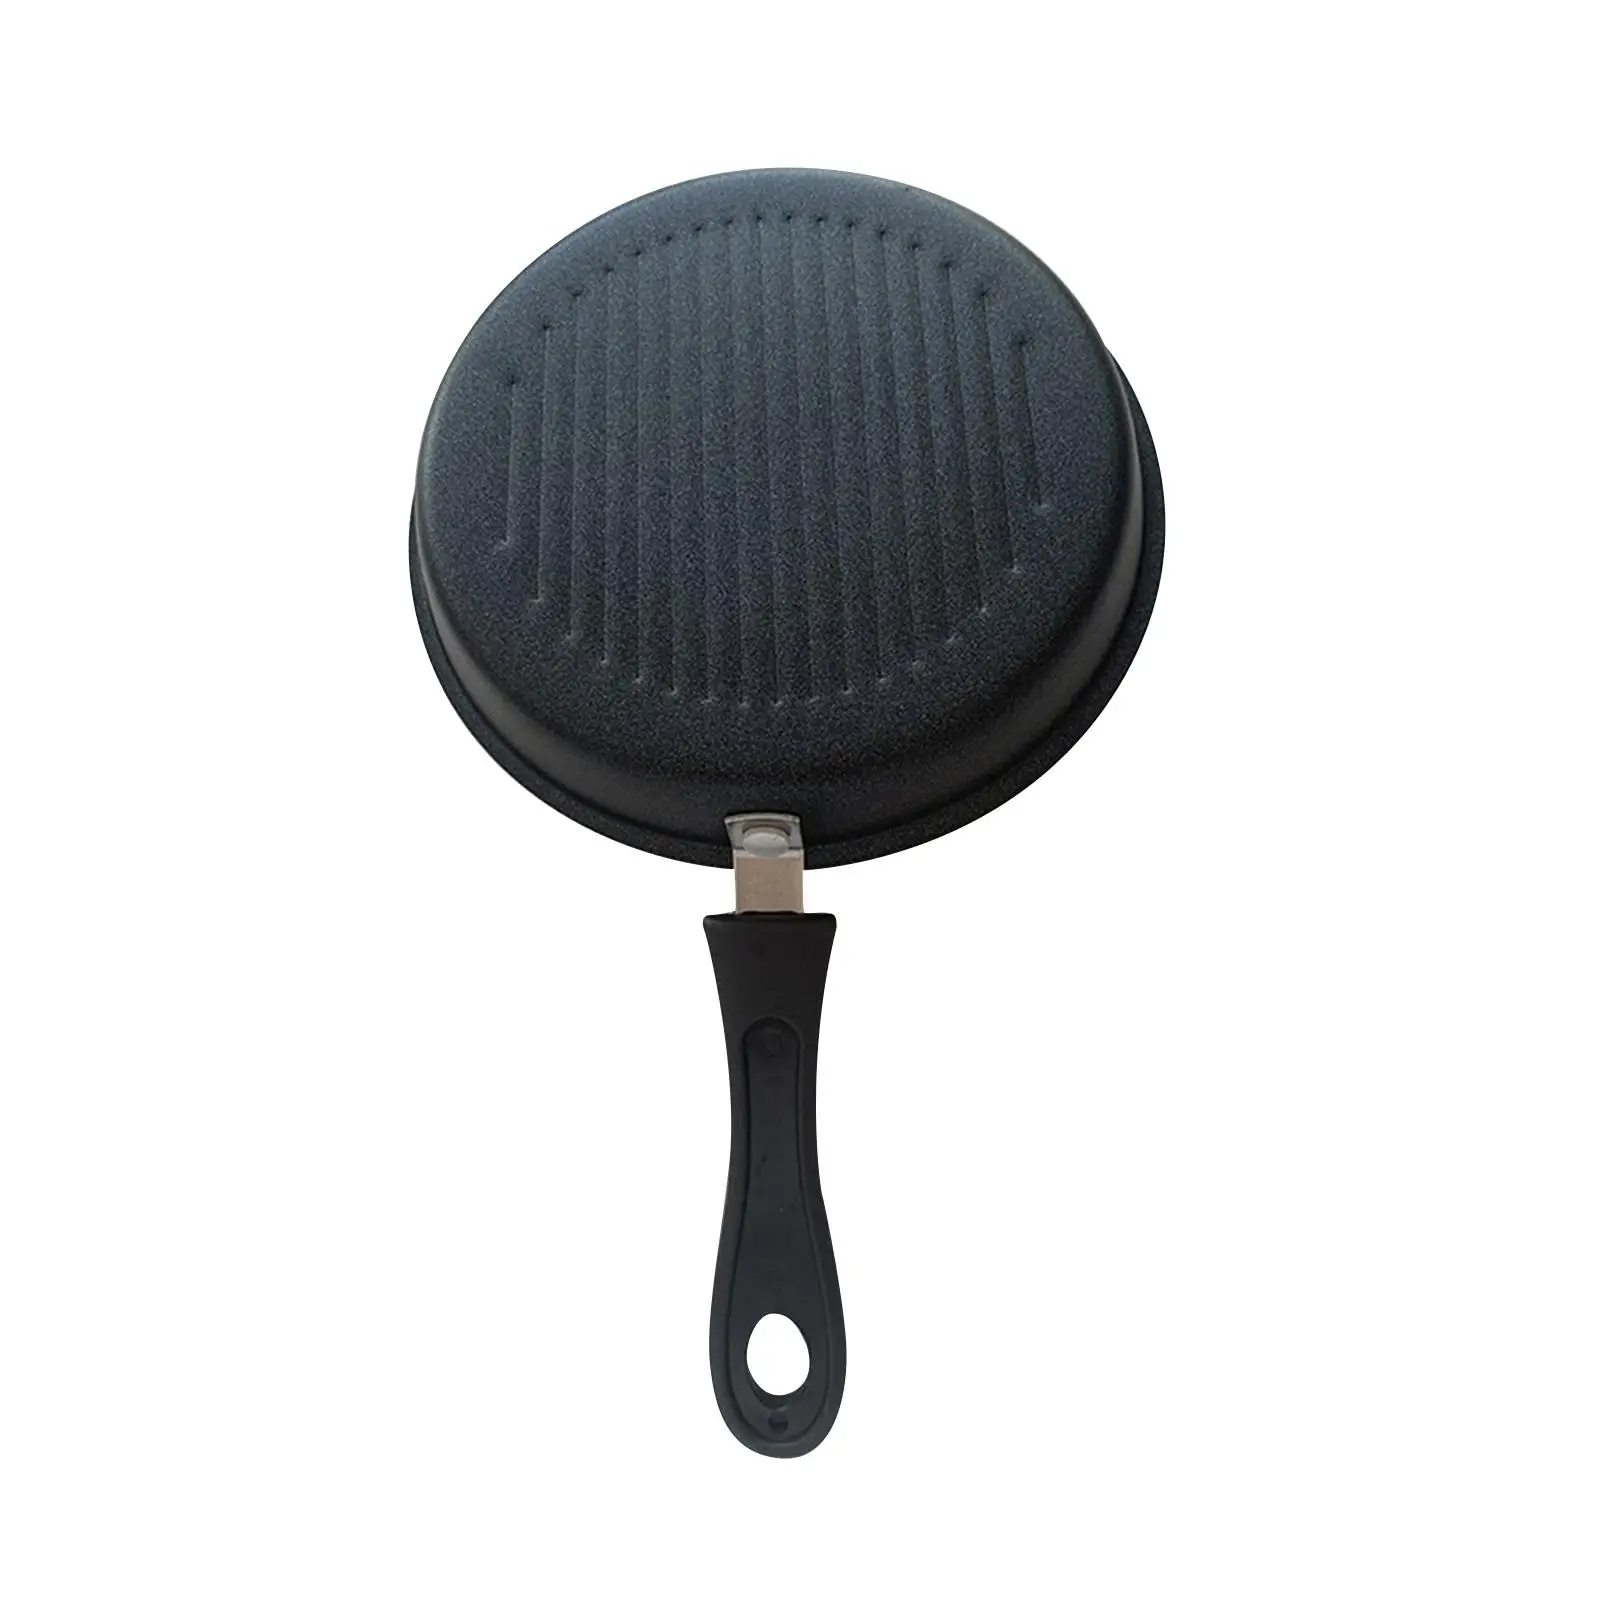 Grill Pan Grilling with Raised Grill Lines Nonstick Household Round Frying Pan Round Skillet Griddle for Fish Meats Picnic